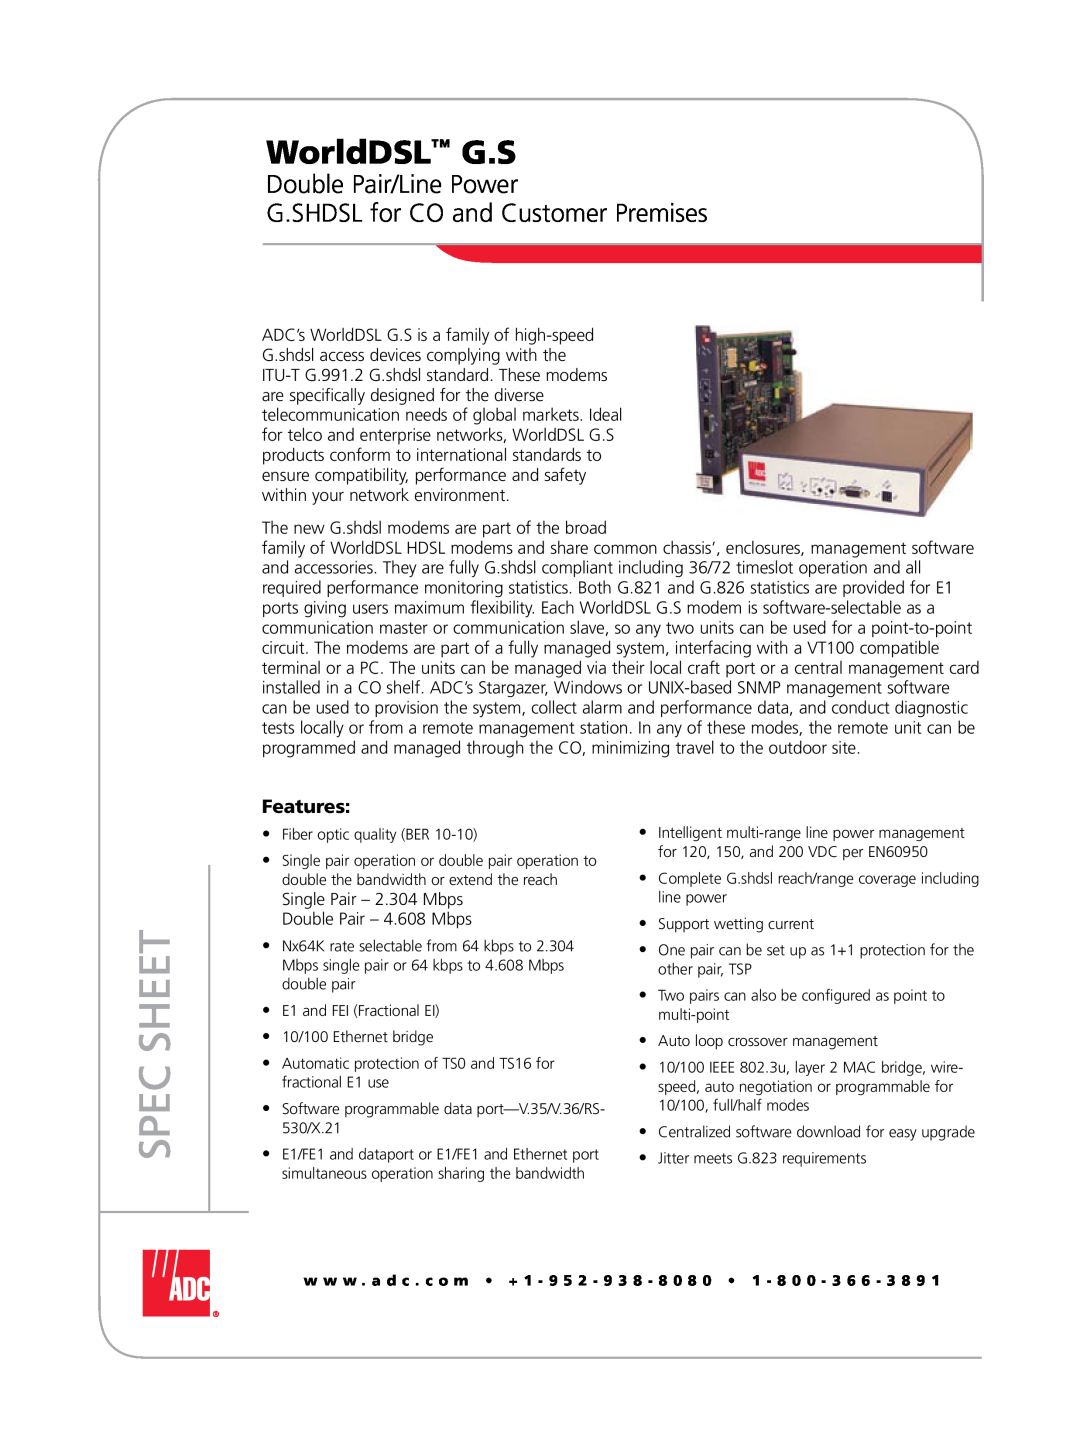 ADC WorldDSL G.S manual Double Pair/Line Power G.SHDSL for CO and Customer Premises, Spec Sheet, Features 